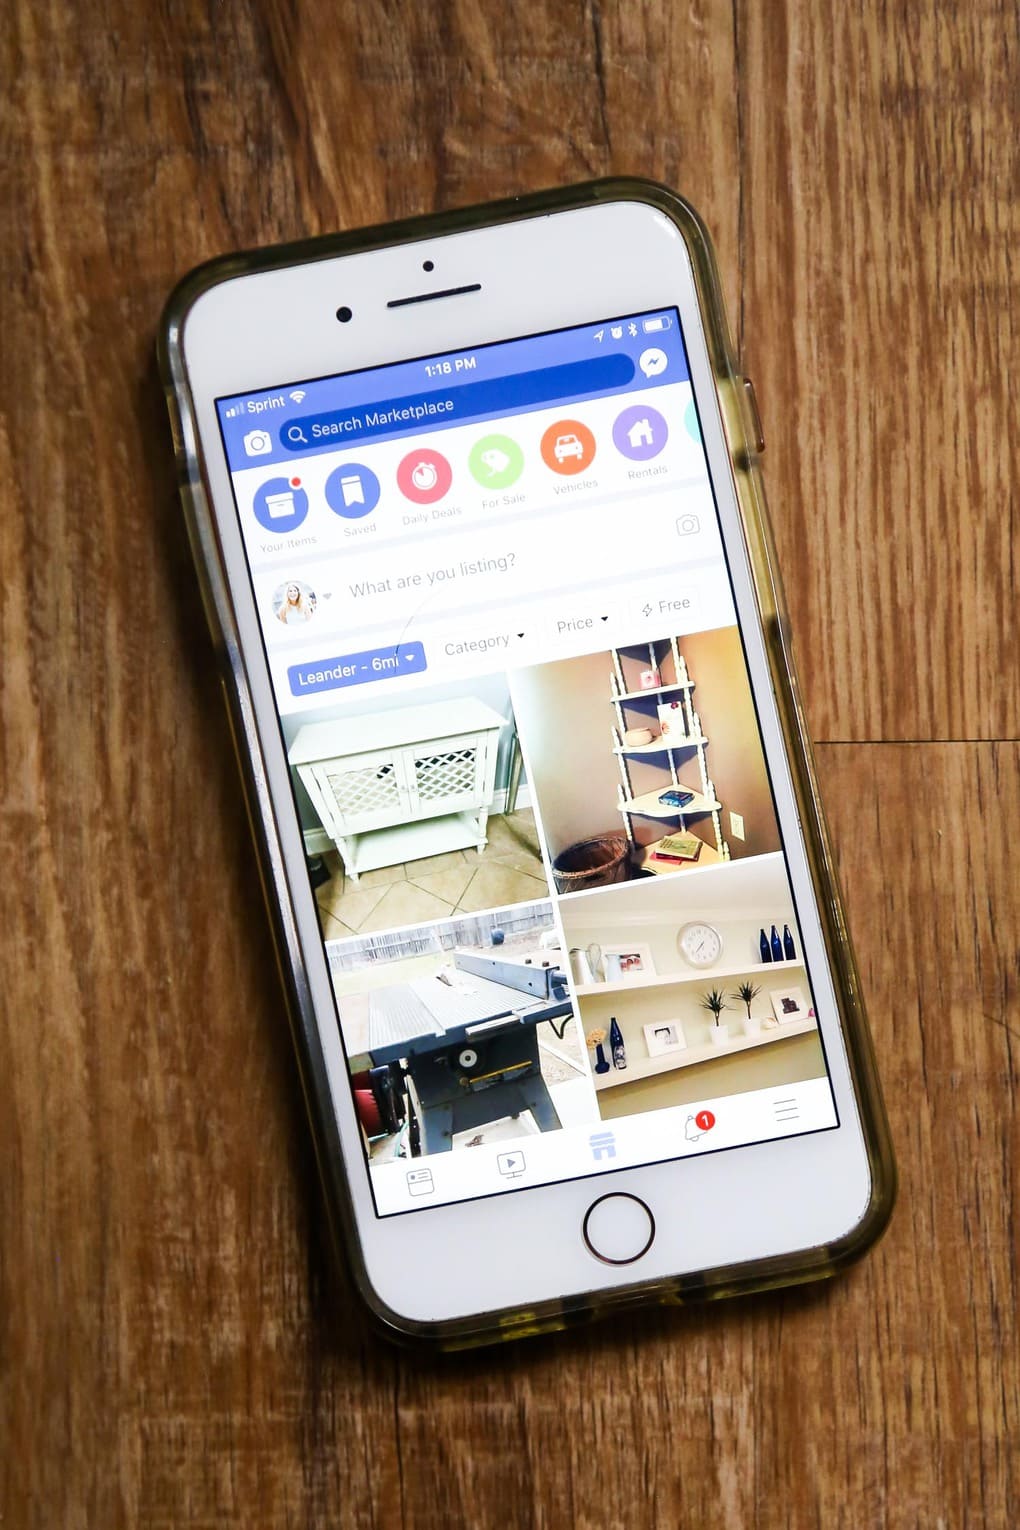 iPhone with Facebook Marketplace pulled up - how to sell furniture online using Facebook Marketplace